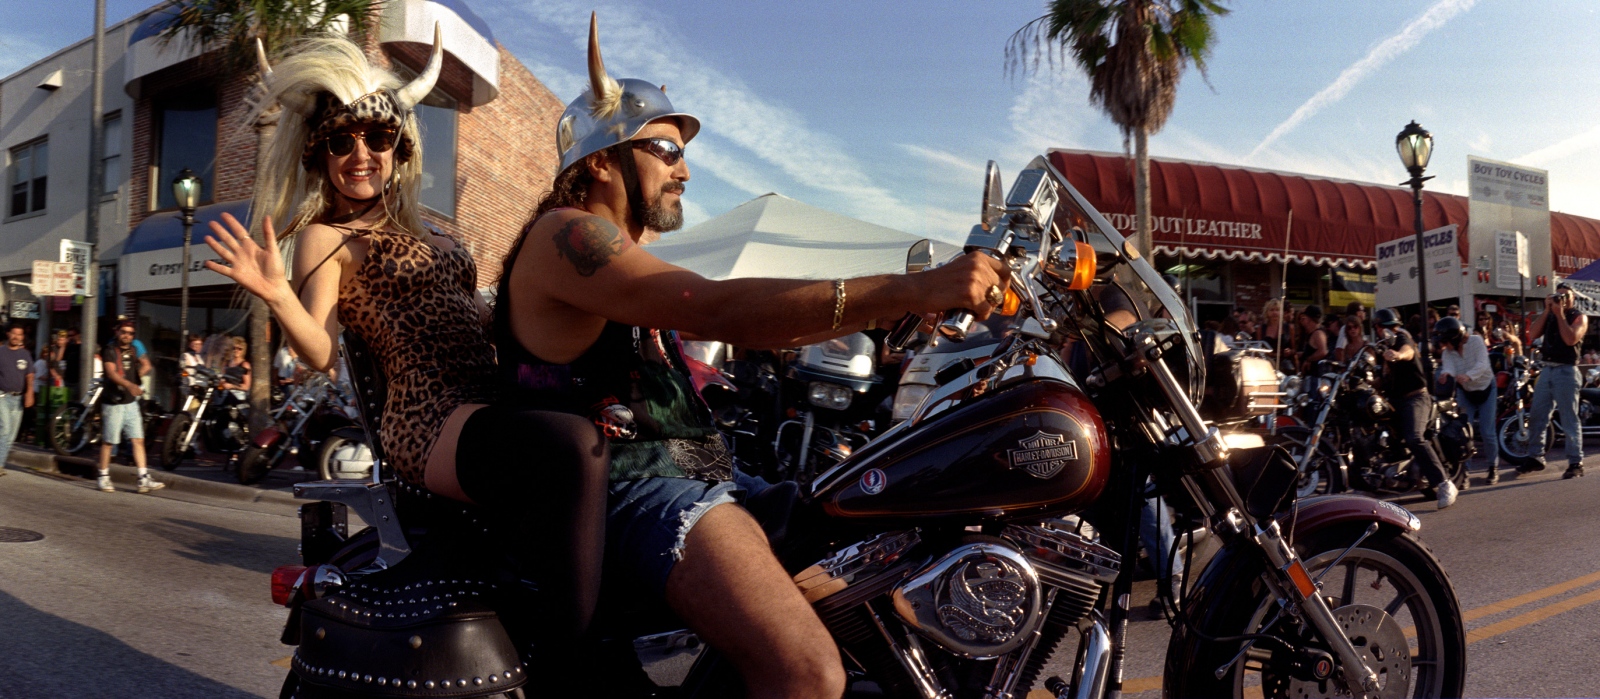 Bikers show off their machines as they cruise the main strip in Daytona.